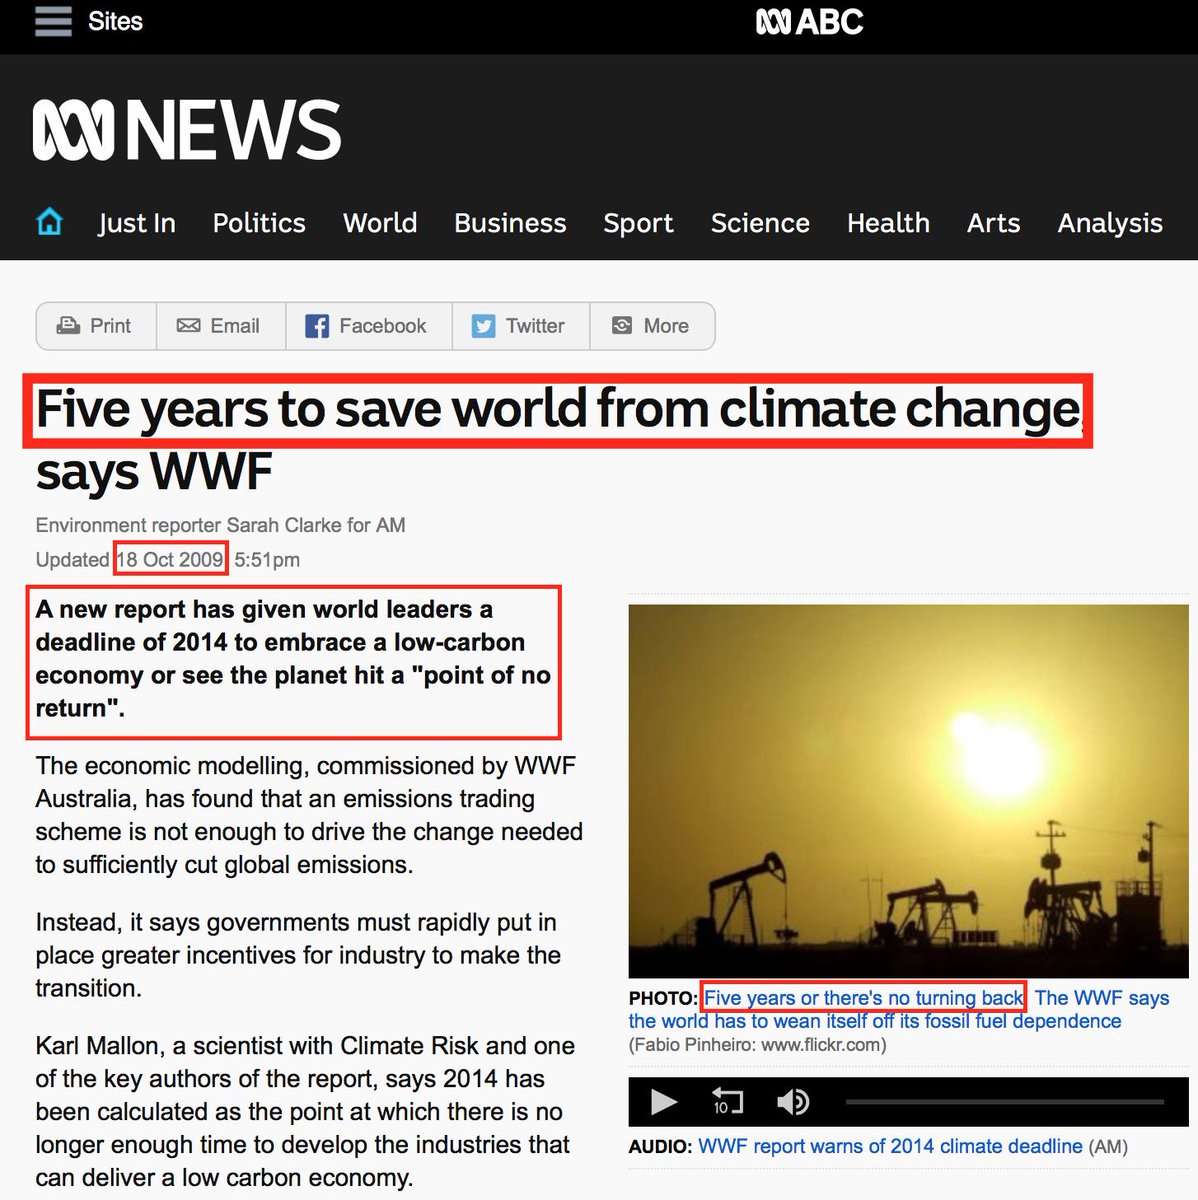 71. BUT climate science also said in 2009 that we had 5 years to save the world from climate change. https://www.abc.net.au/news/2009-10-19/five-years-to-save-world-from-climate-change-says/1108482